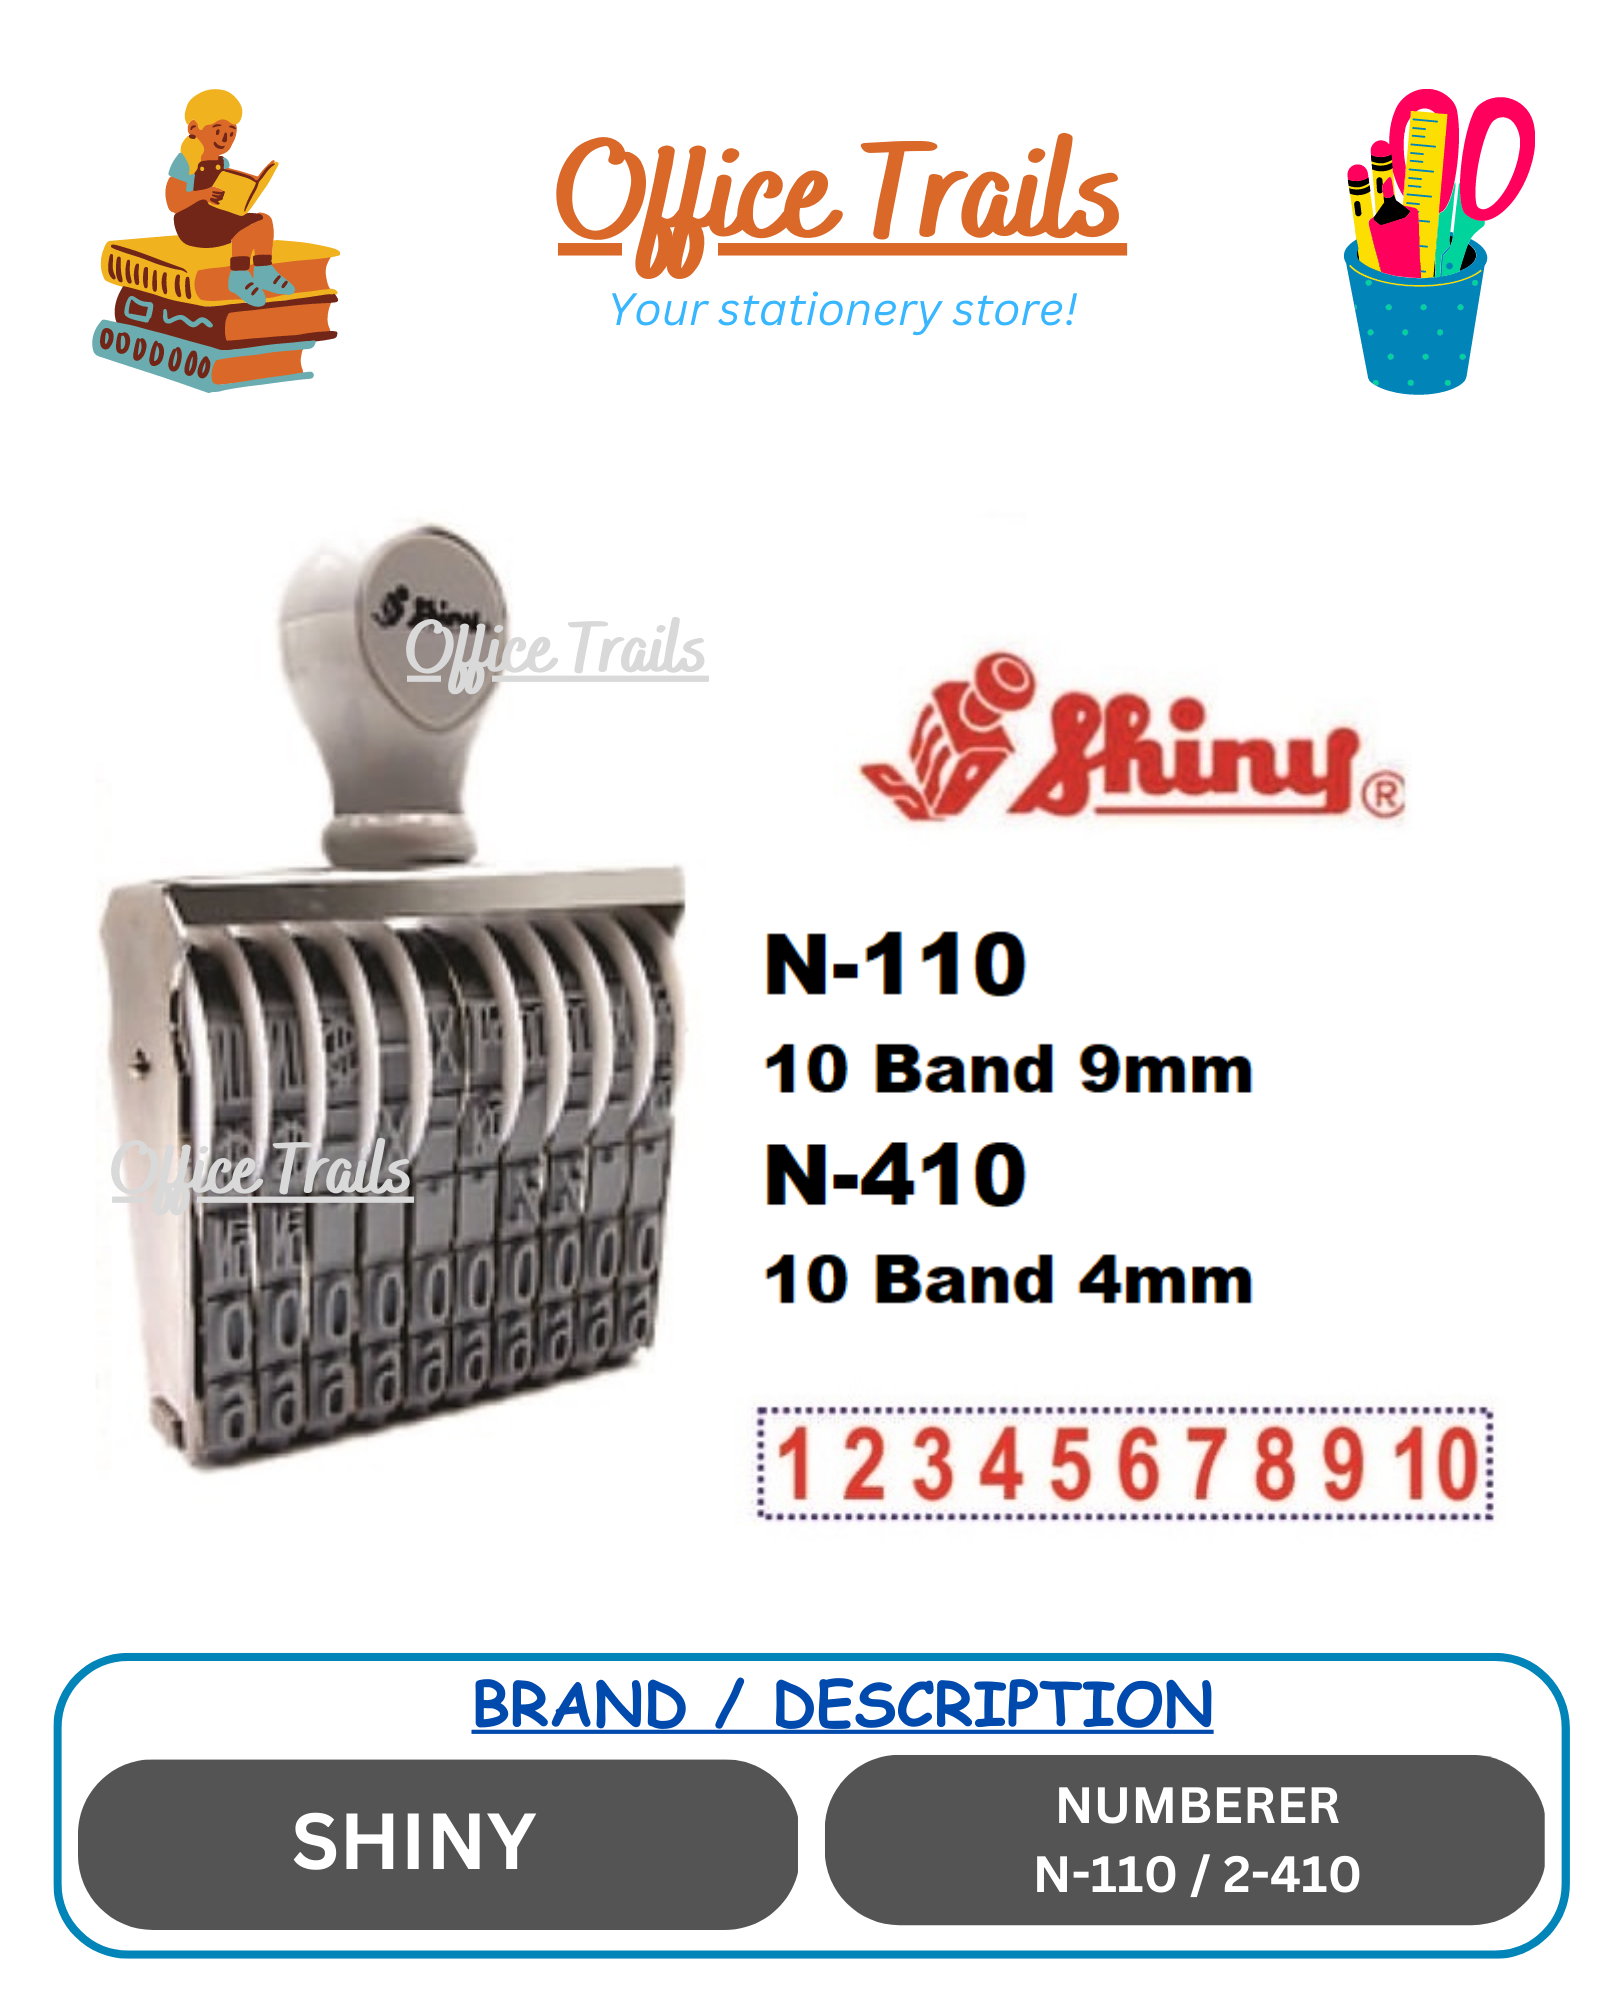 Shiny Number Stamp Size 3 - 10 Bands